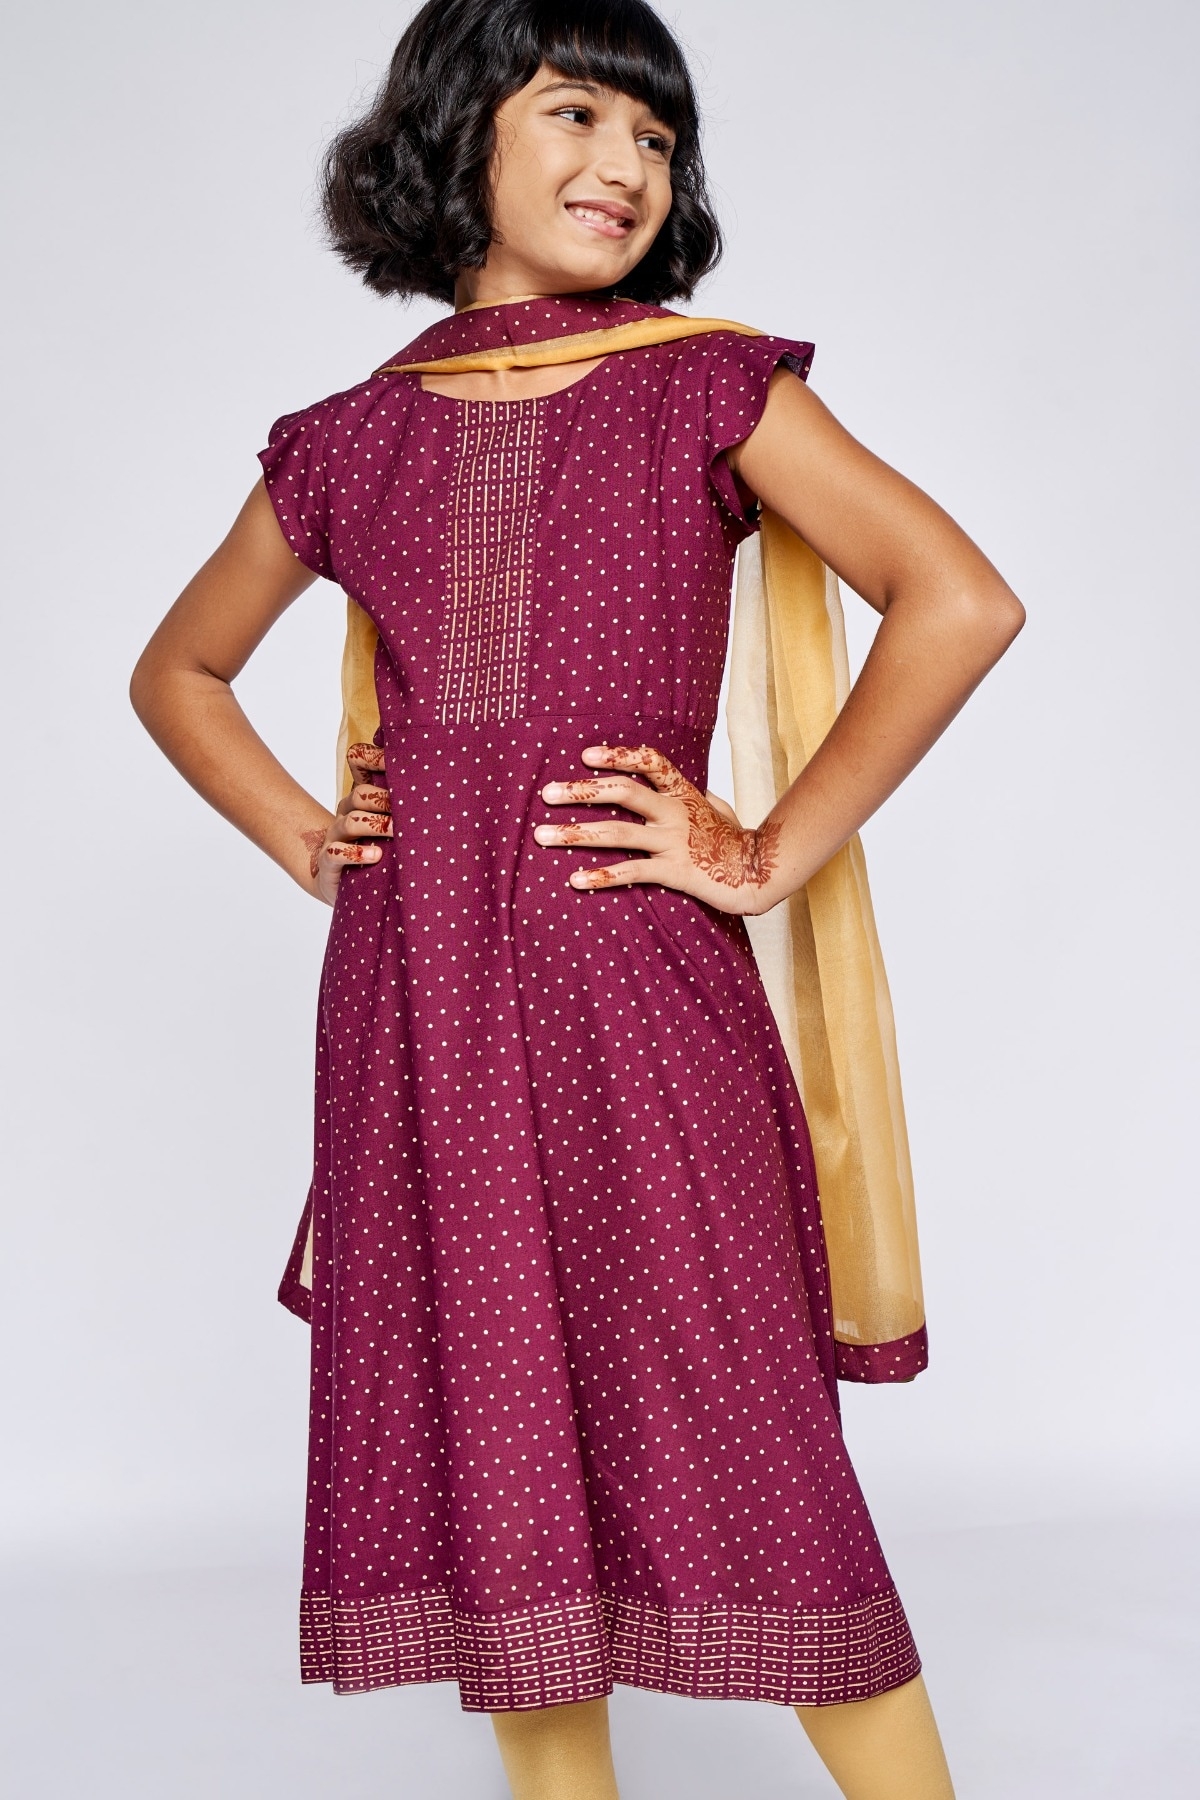 Global Desi | Maroon Embellished Fit and Flare Suit 0